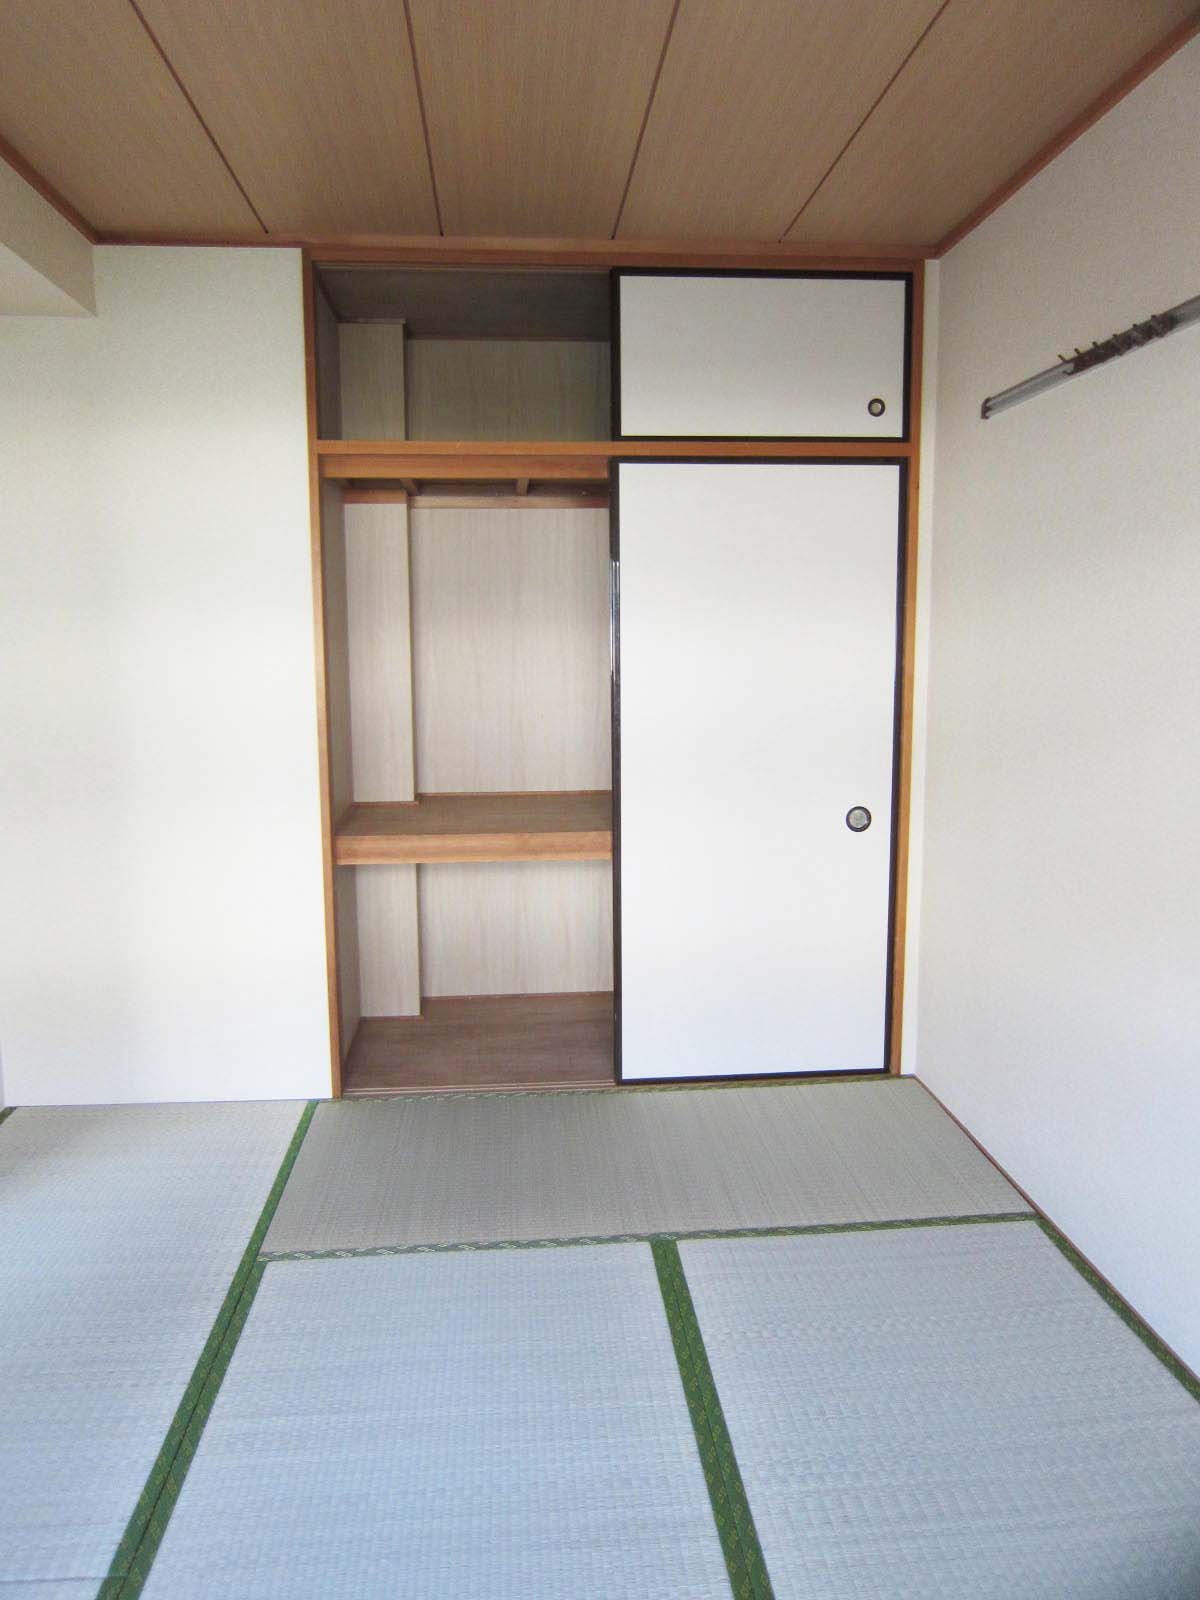 Other room space. There is a closet large Japanese-style room